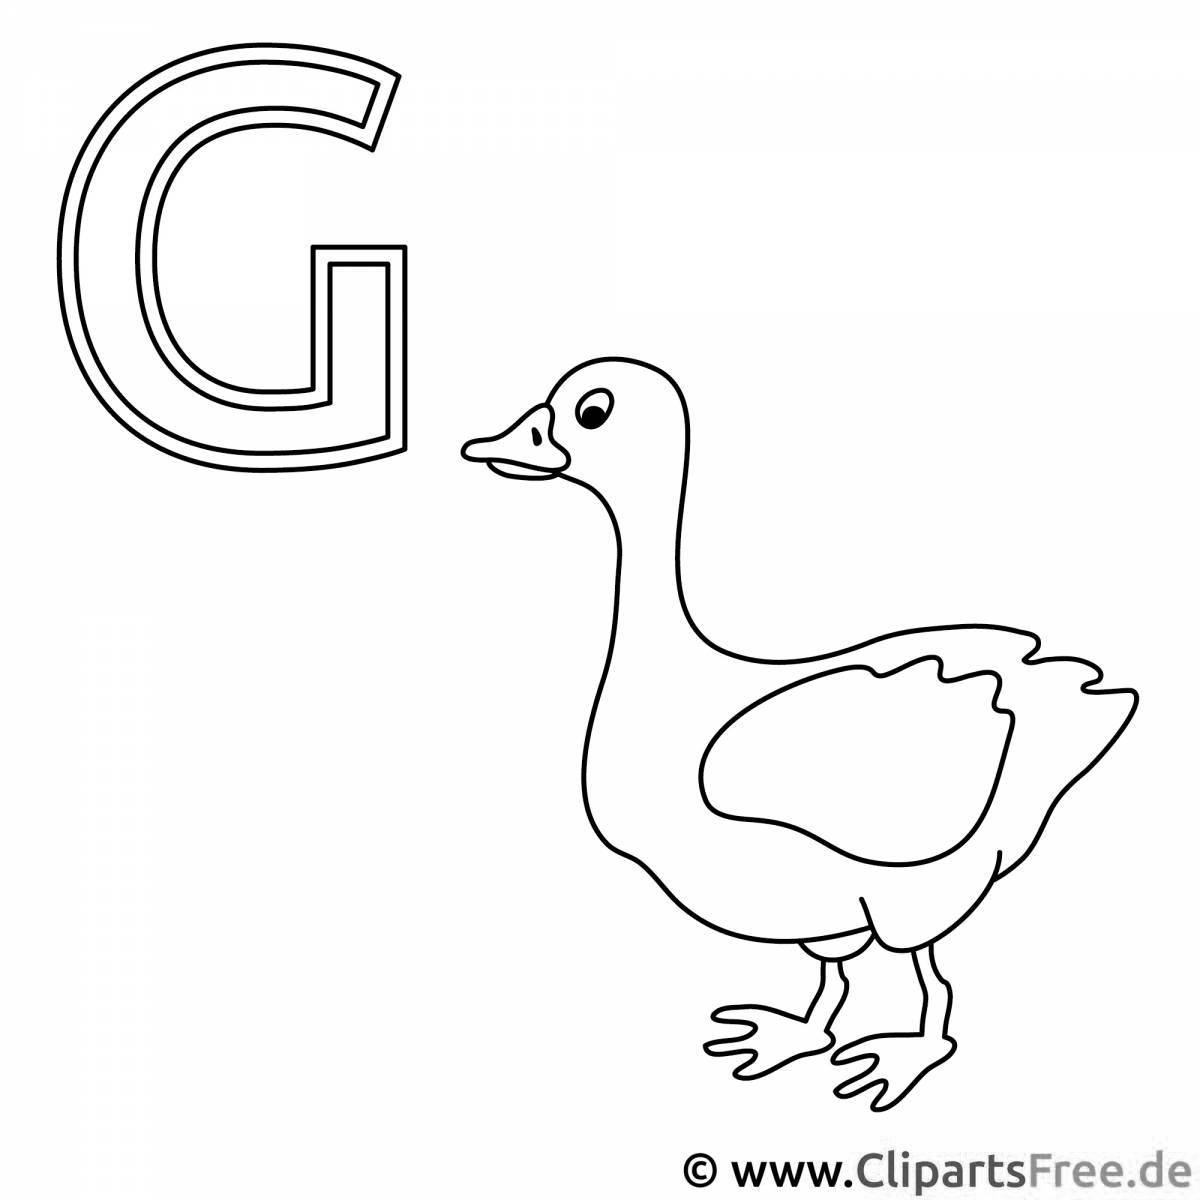 Sweet goose coloring book for 3-4 year olds